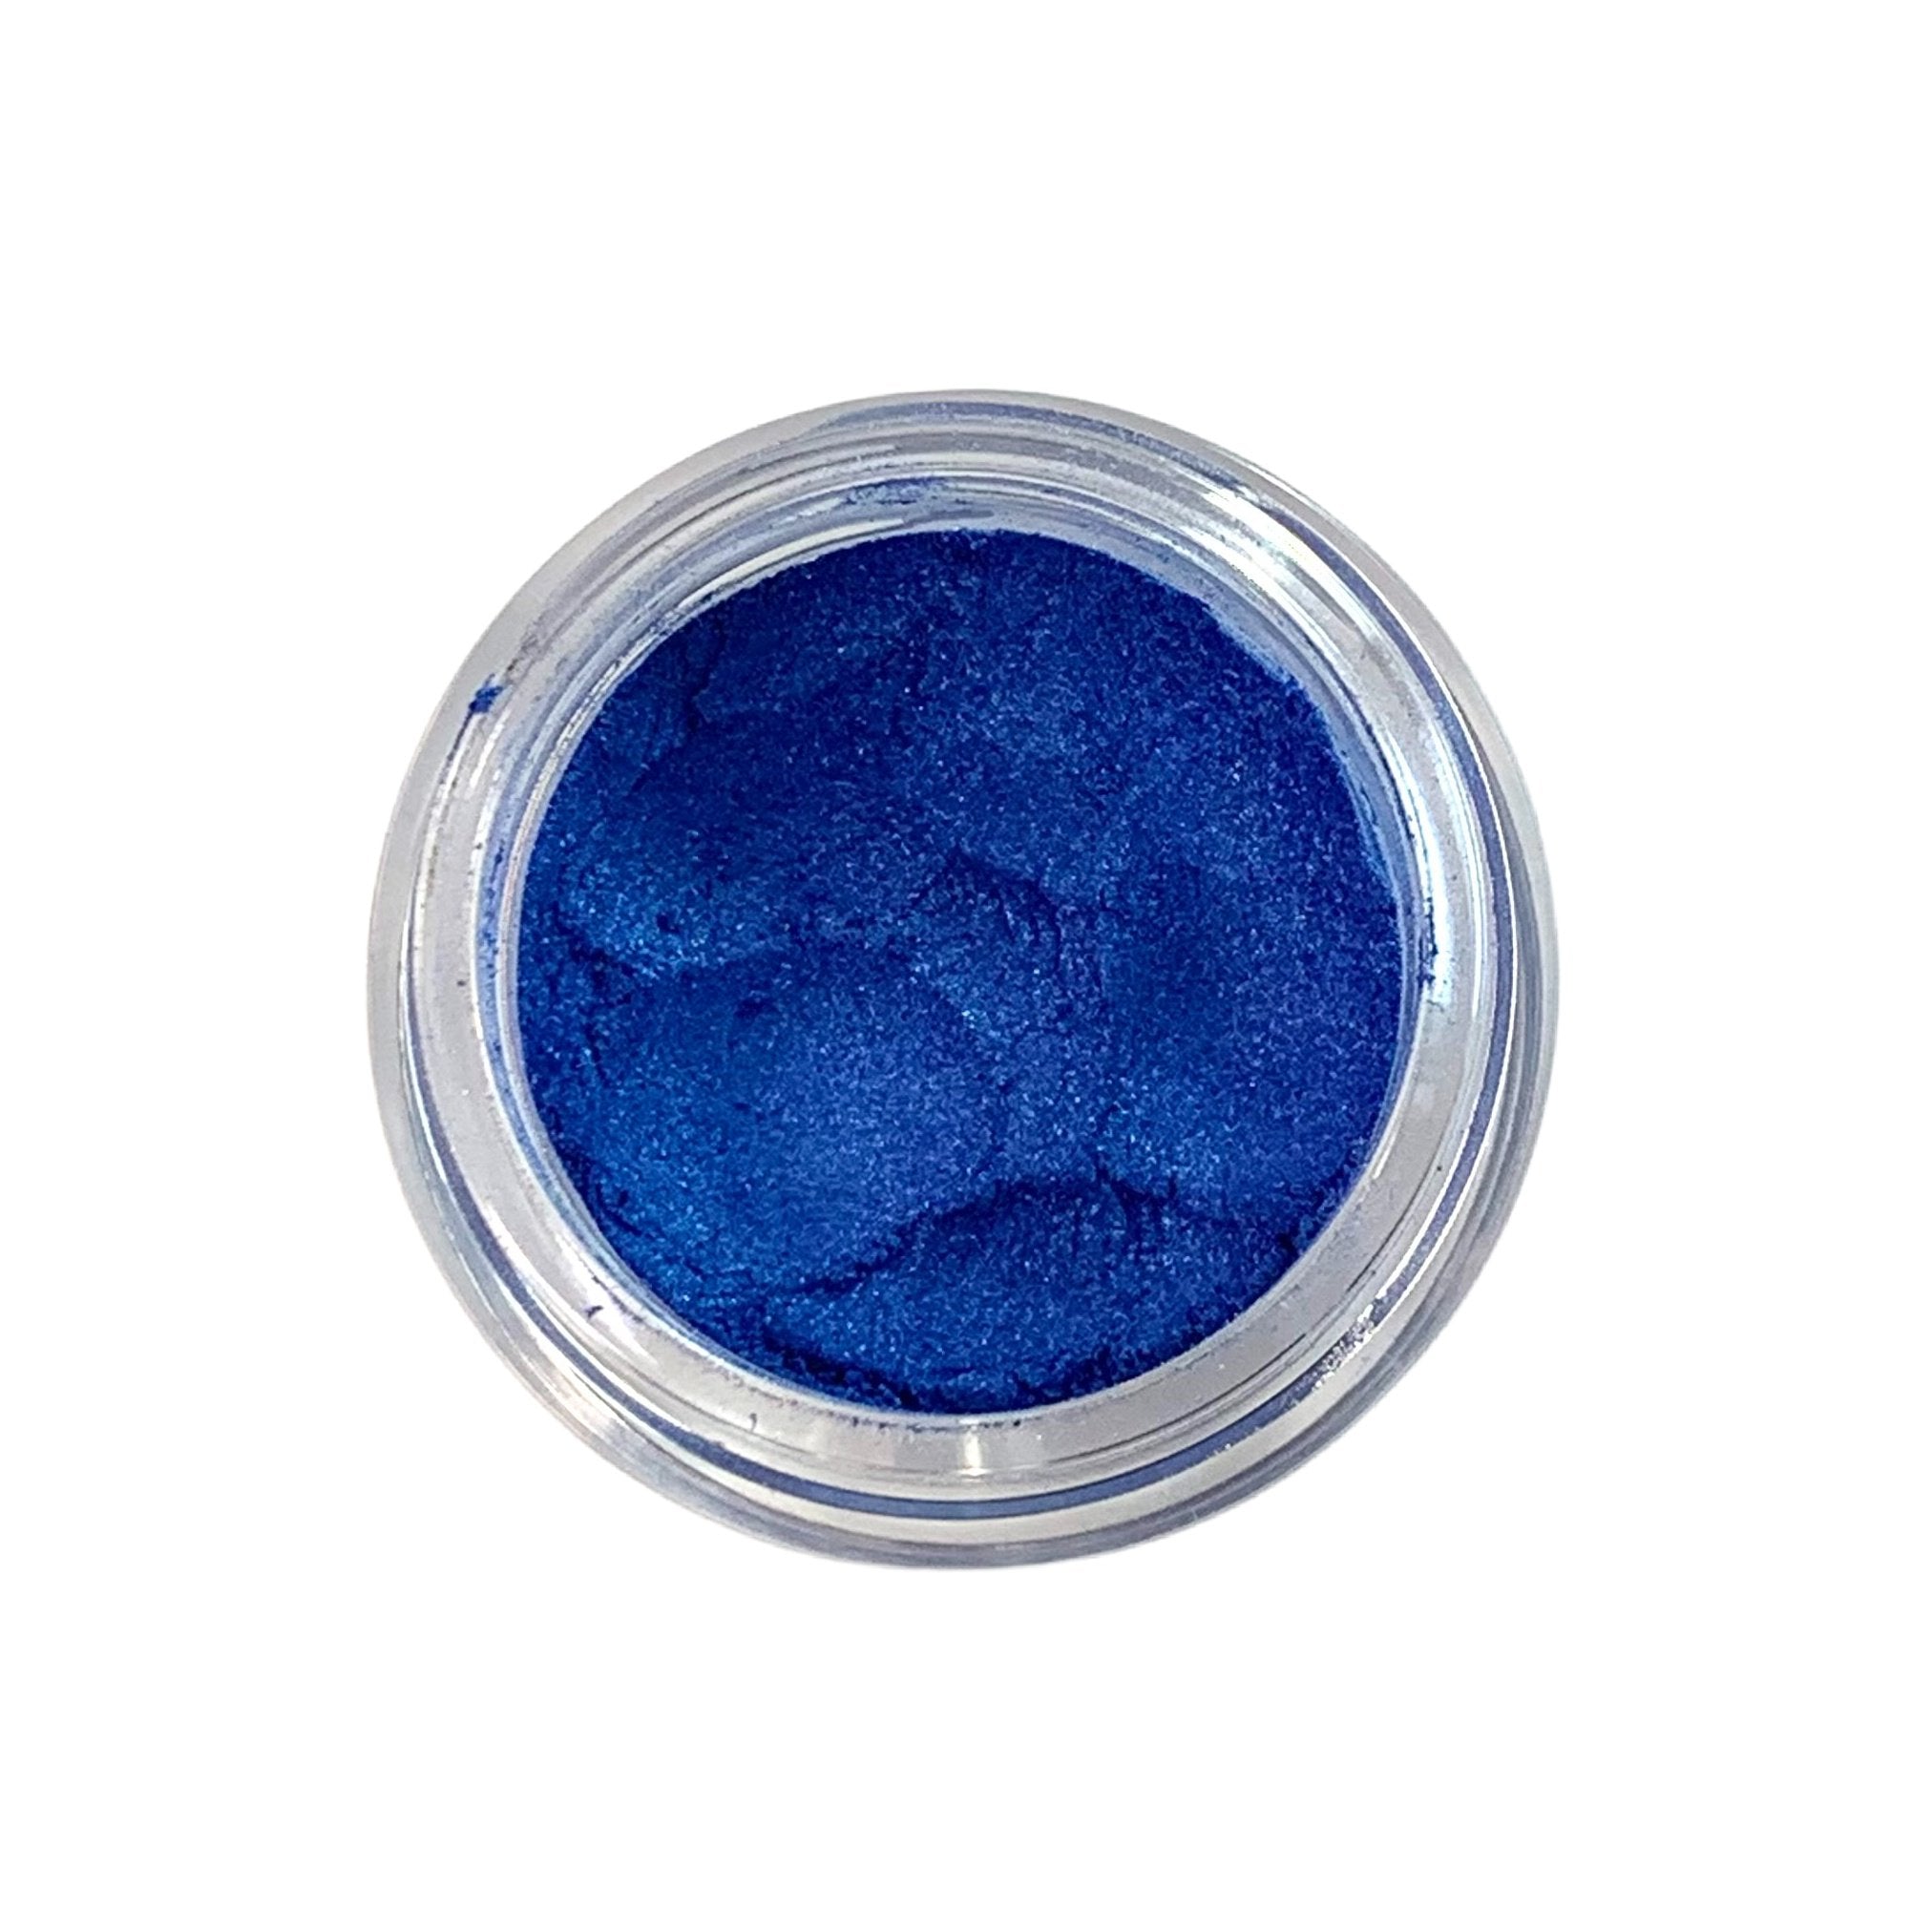 lapis - rich deep blue with silver and violet undertones. loose mineral eyeshadow, 10 gram sifter jar. vegan and cruelty free